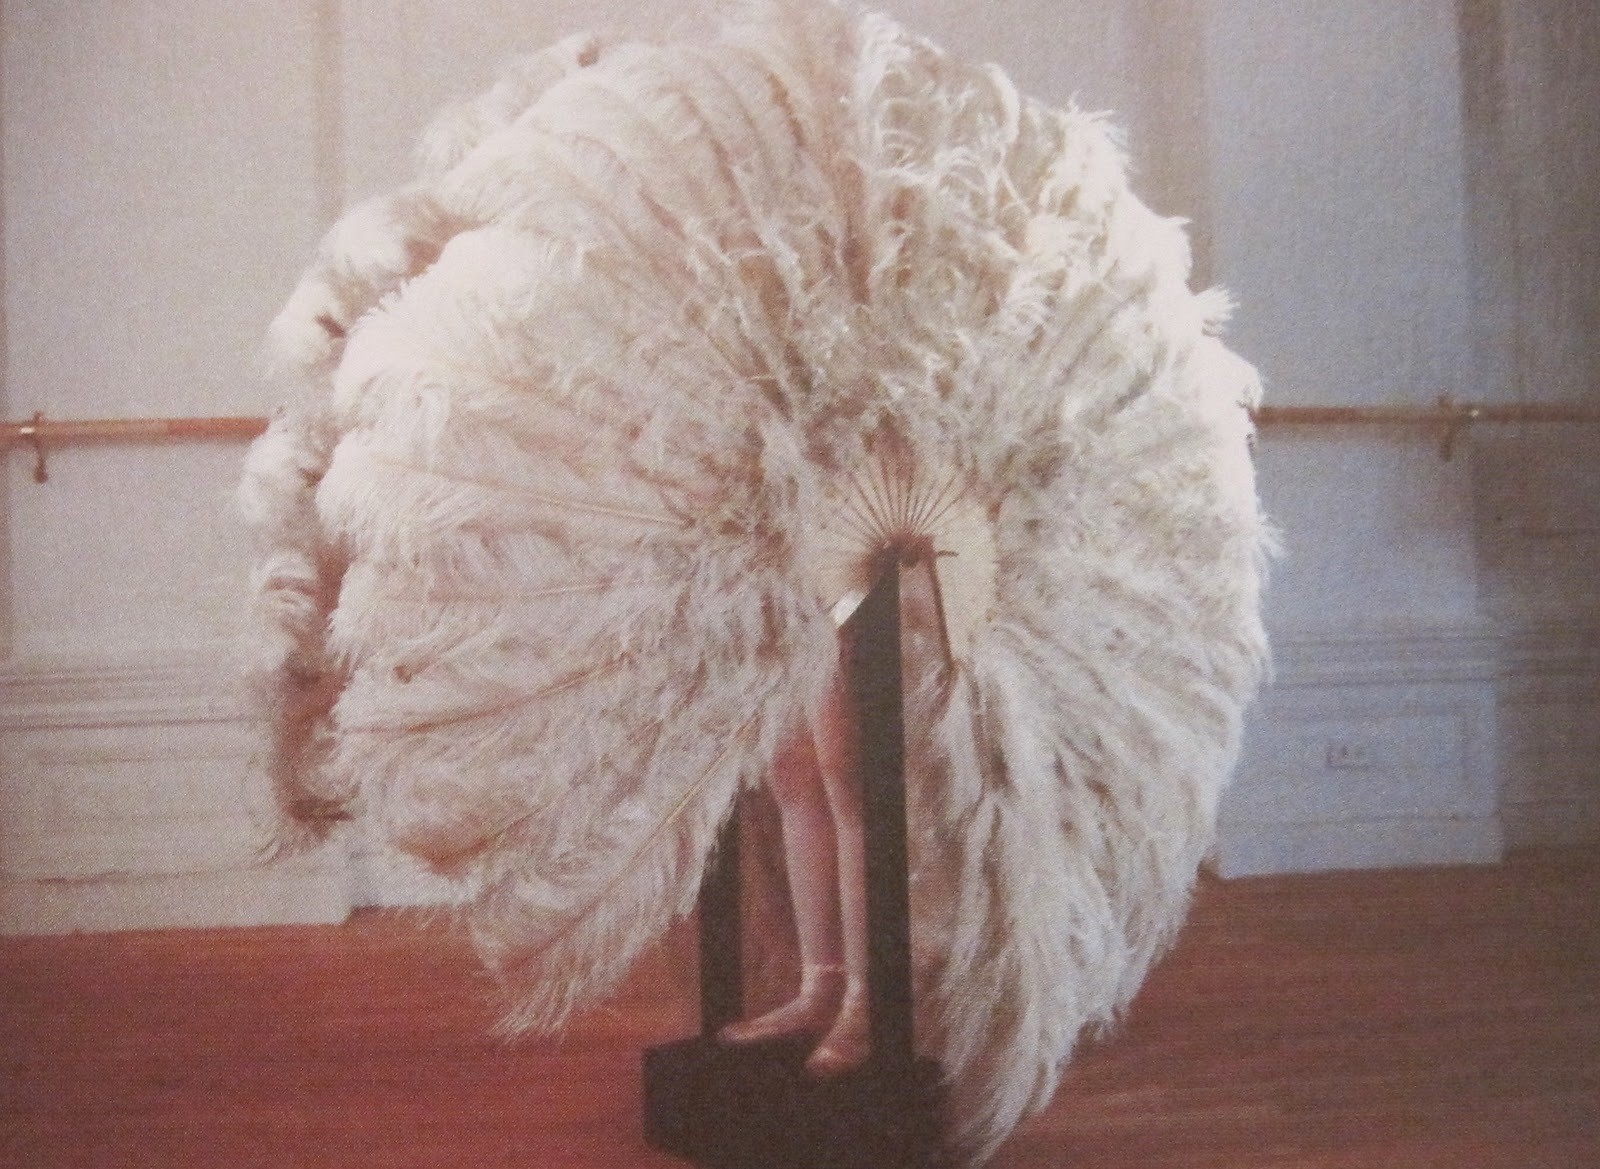 Rebecca Horn. The Feathered Prison Fan. 1978. Private collection of Rebecca Horn.